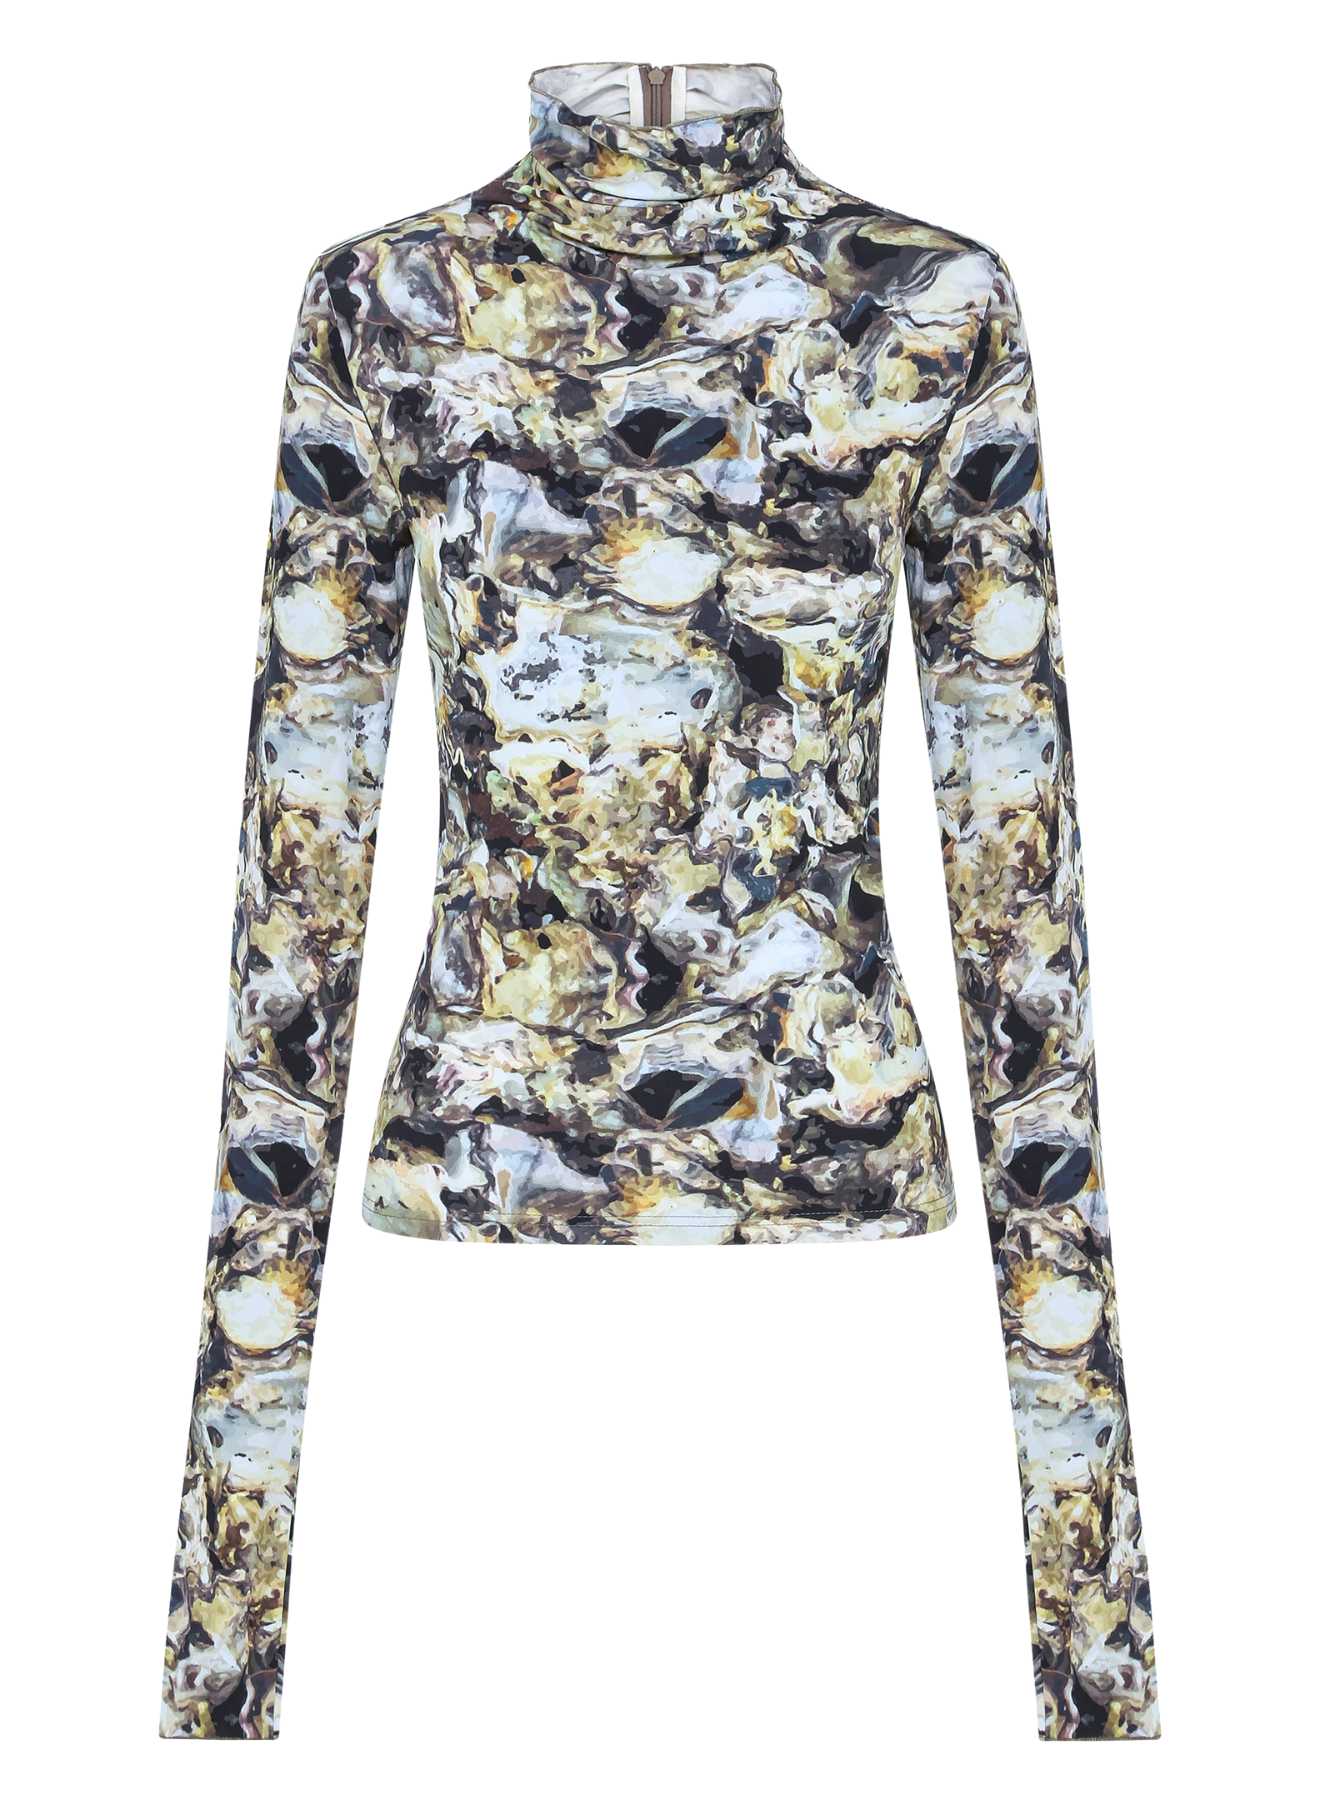 ANNA QUAN's Long Sleeve Printed Jersey Funnel Neck Top. A high neck, slouchy turtleneck featuring an invisible back zip and in a neutral oyster print design. Everyday tops, print tops, print long sleeve top, day-to-night tops.